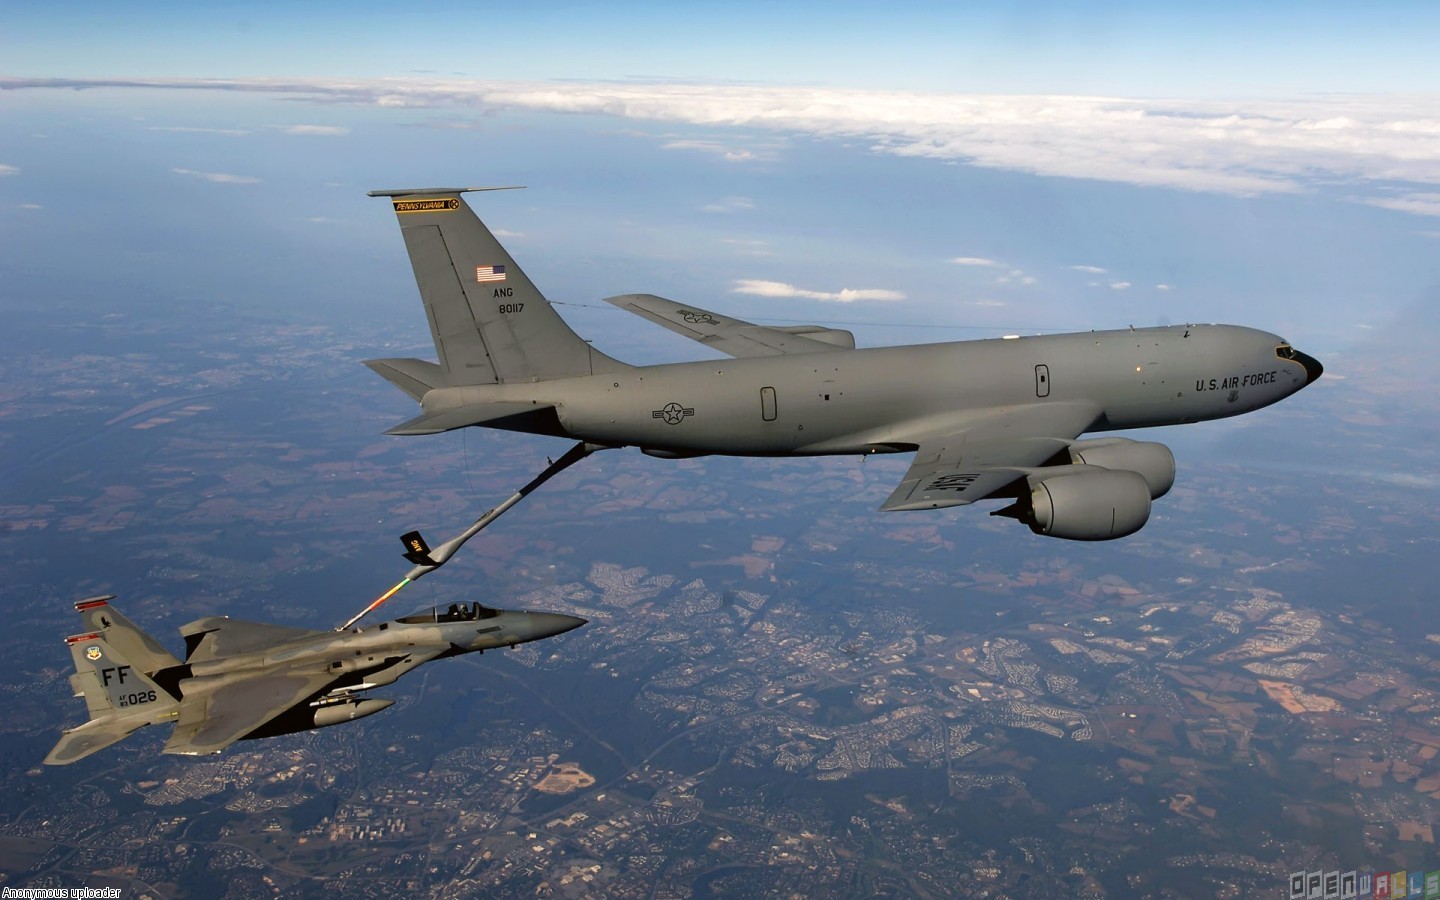 Us Military Jets 8289 Hd Wallpapers in Aircraft   Imagescicom 1440x900